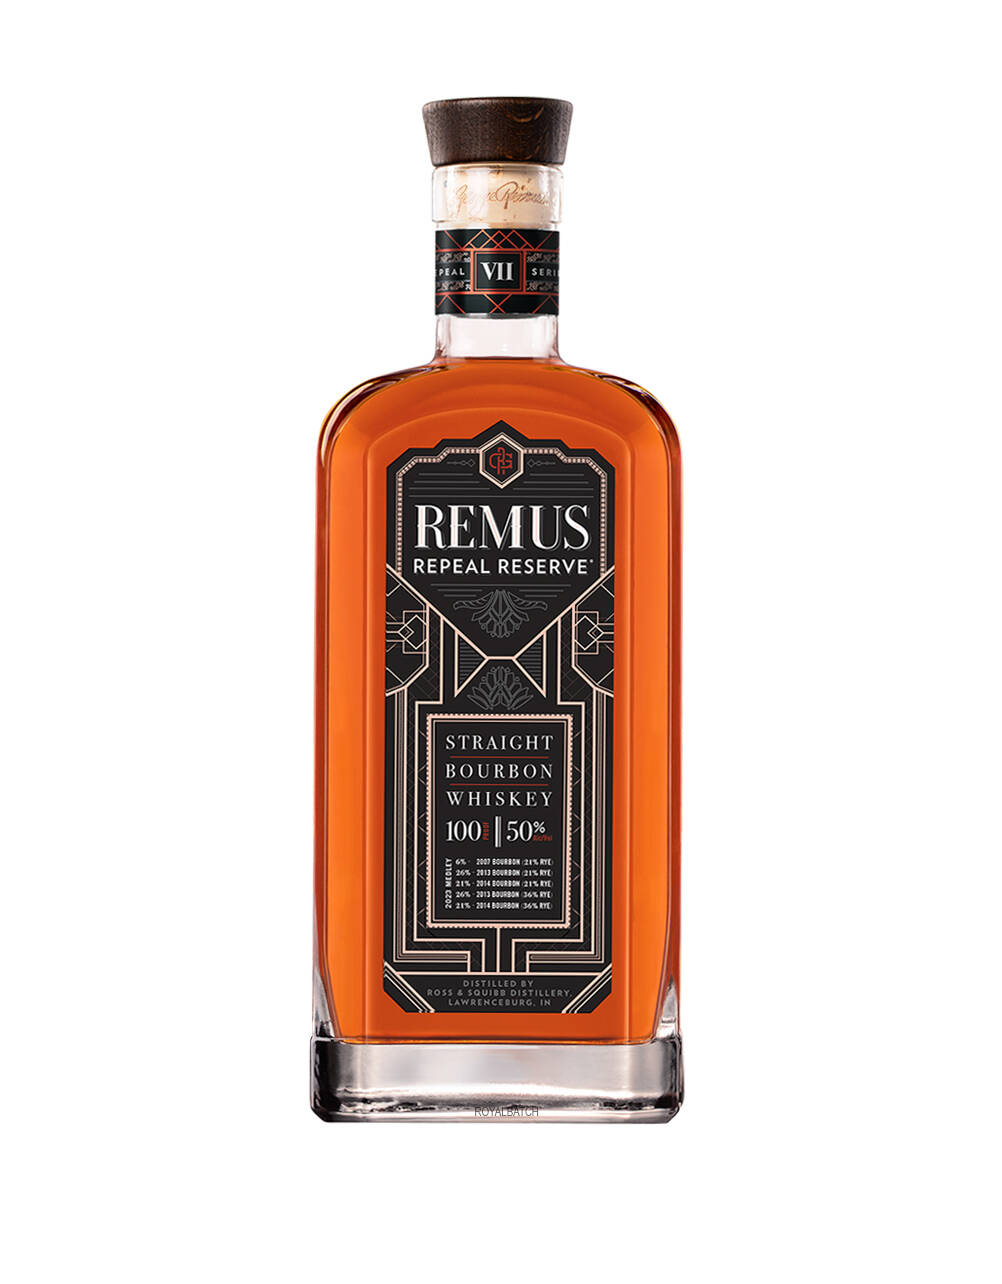 George Remus Repeal Reserve VII Bourbon Whiskey